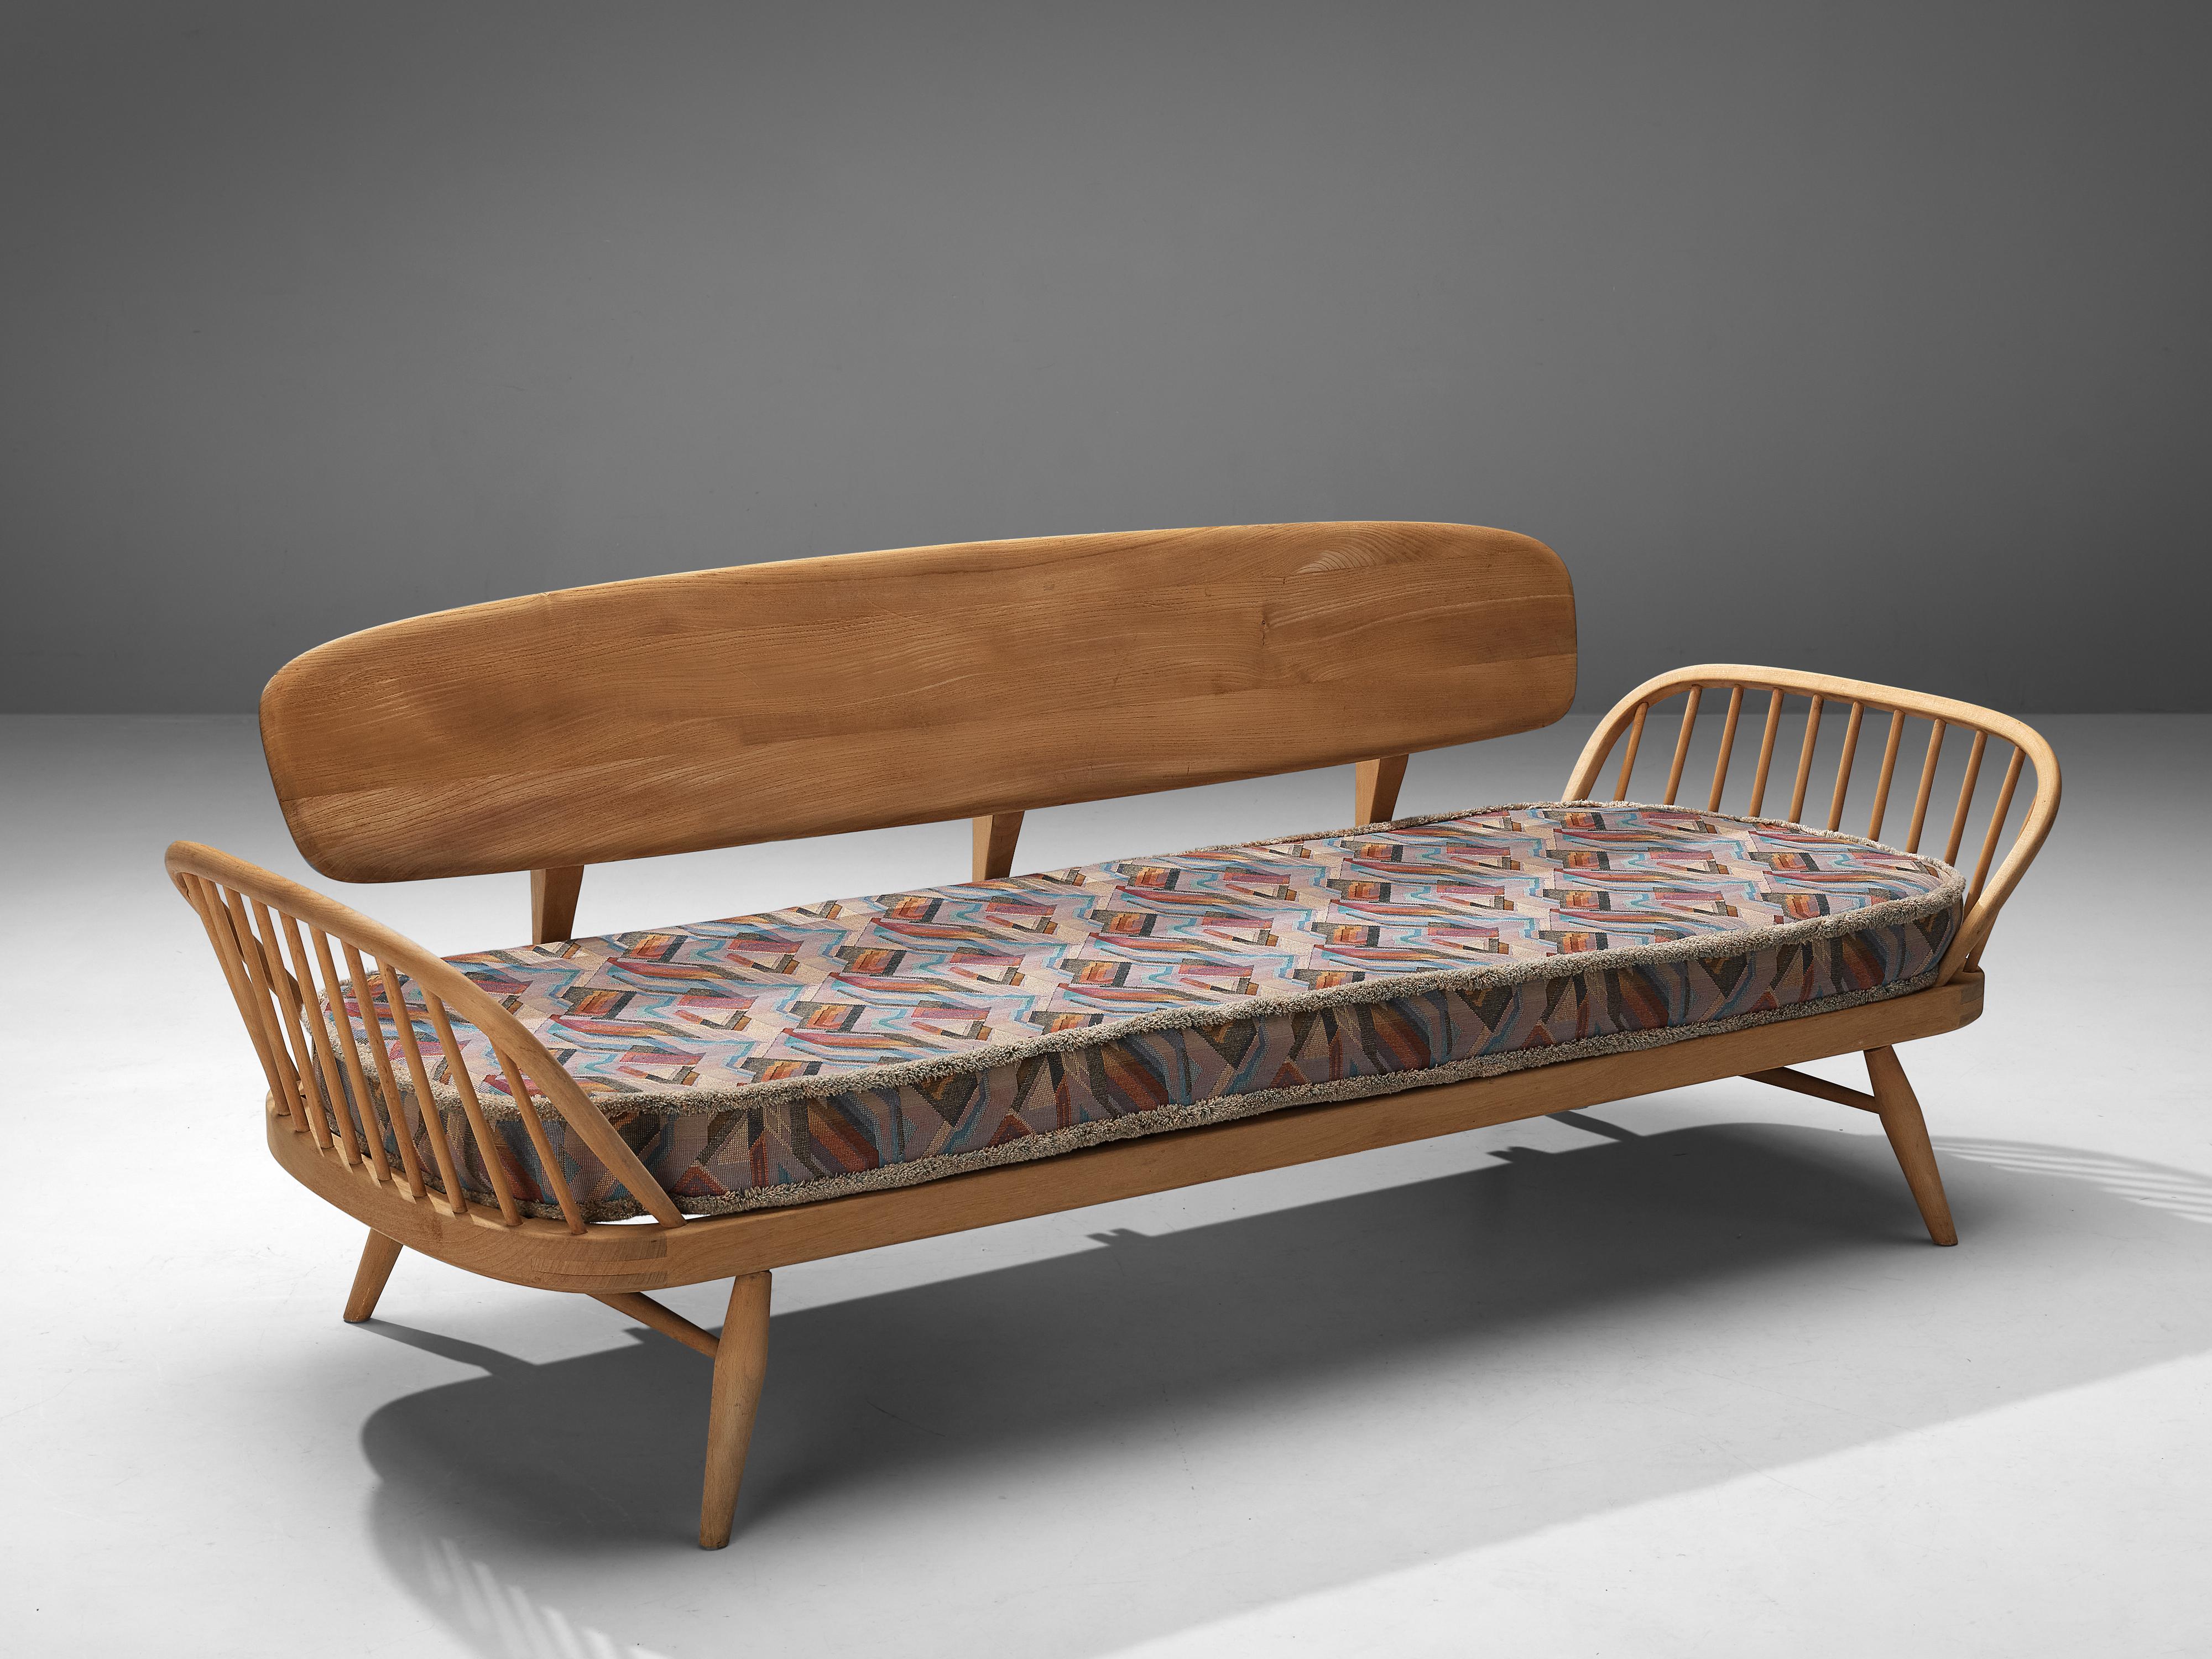 Lucian Ercolani for Ercol, sofa model ‘355’, beech, metal, fabric, United Kingdom, 1950s

The ‘studio sofa’, as Ercol describes it, derived from the ‘Originals’ series in the 1950s/1960s. All elements of the ‘Original’ collection were designed by